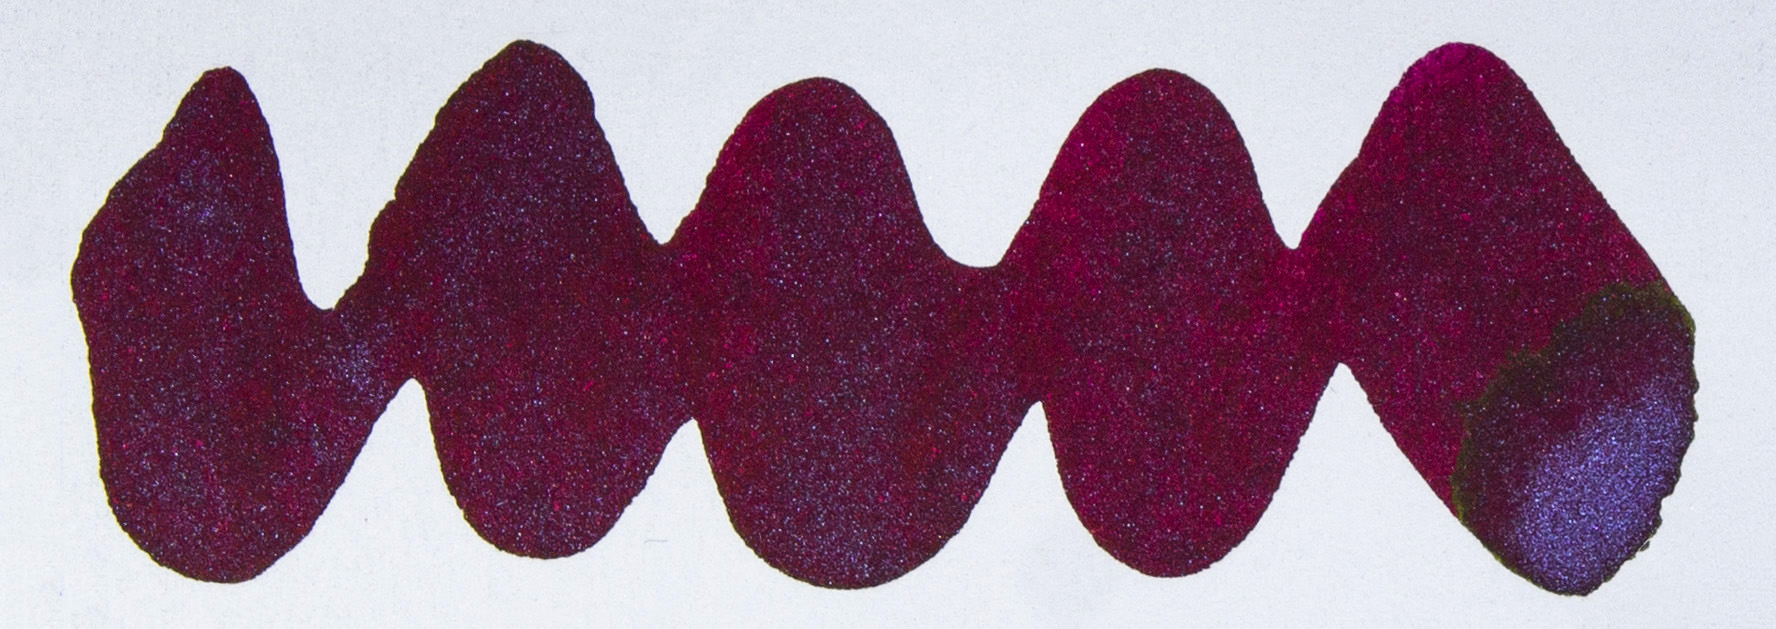 Diamine Inkvent Red Edition - All the Best Ink sample 2ml